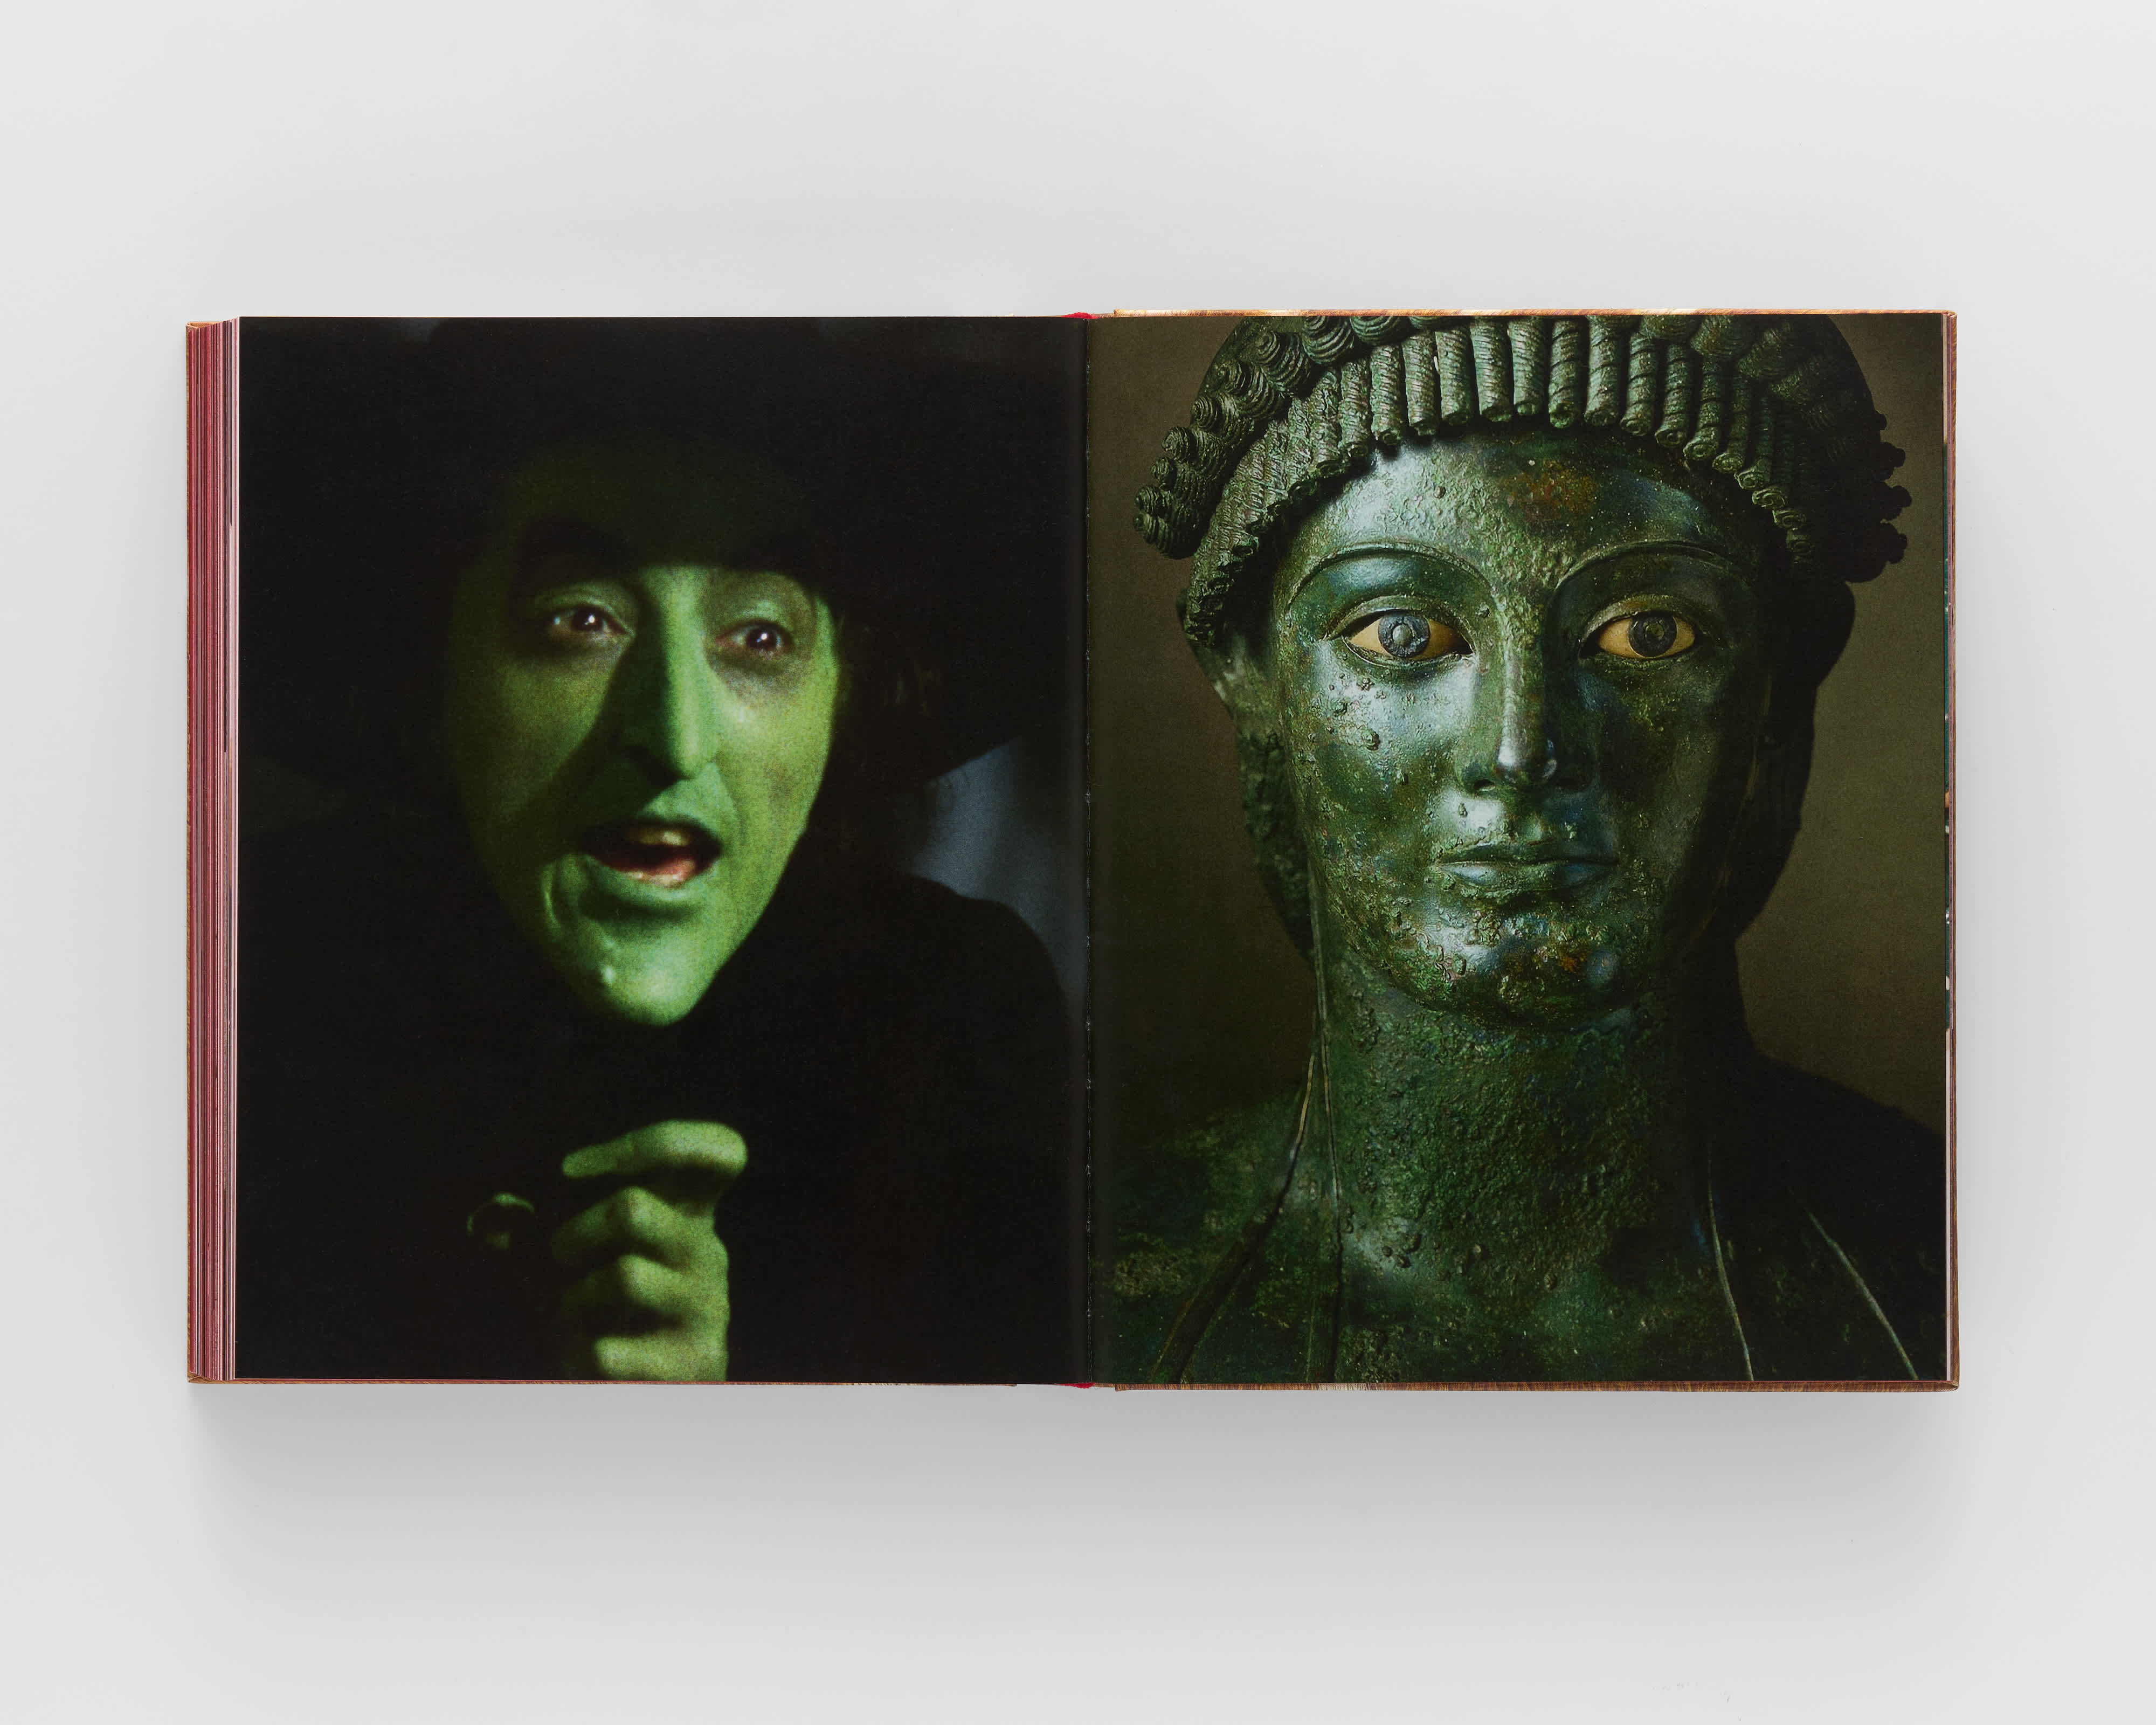 An open book on a grey background. The left page features a photograph of The Wicked Witch of The West from the original Wizard of Oz film. The right page juxtaposes a metal bust of a woman, turned green with age, from the Hellenistic period. 